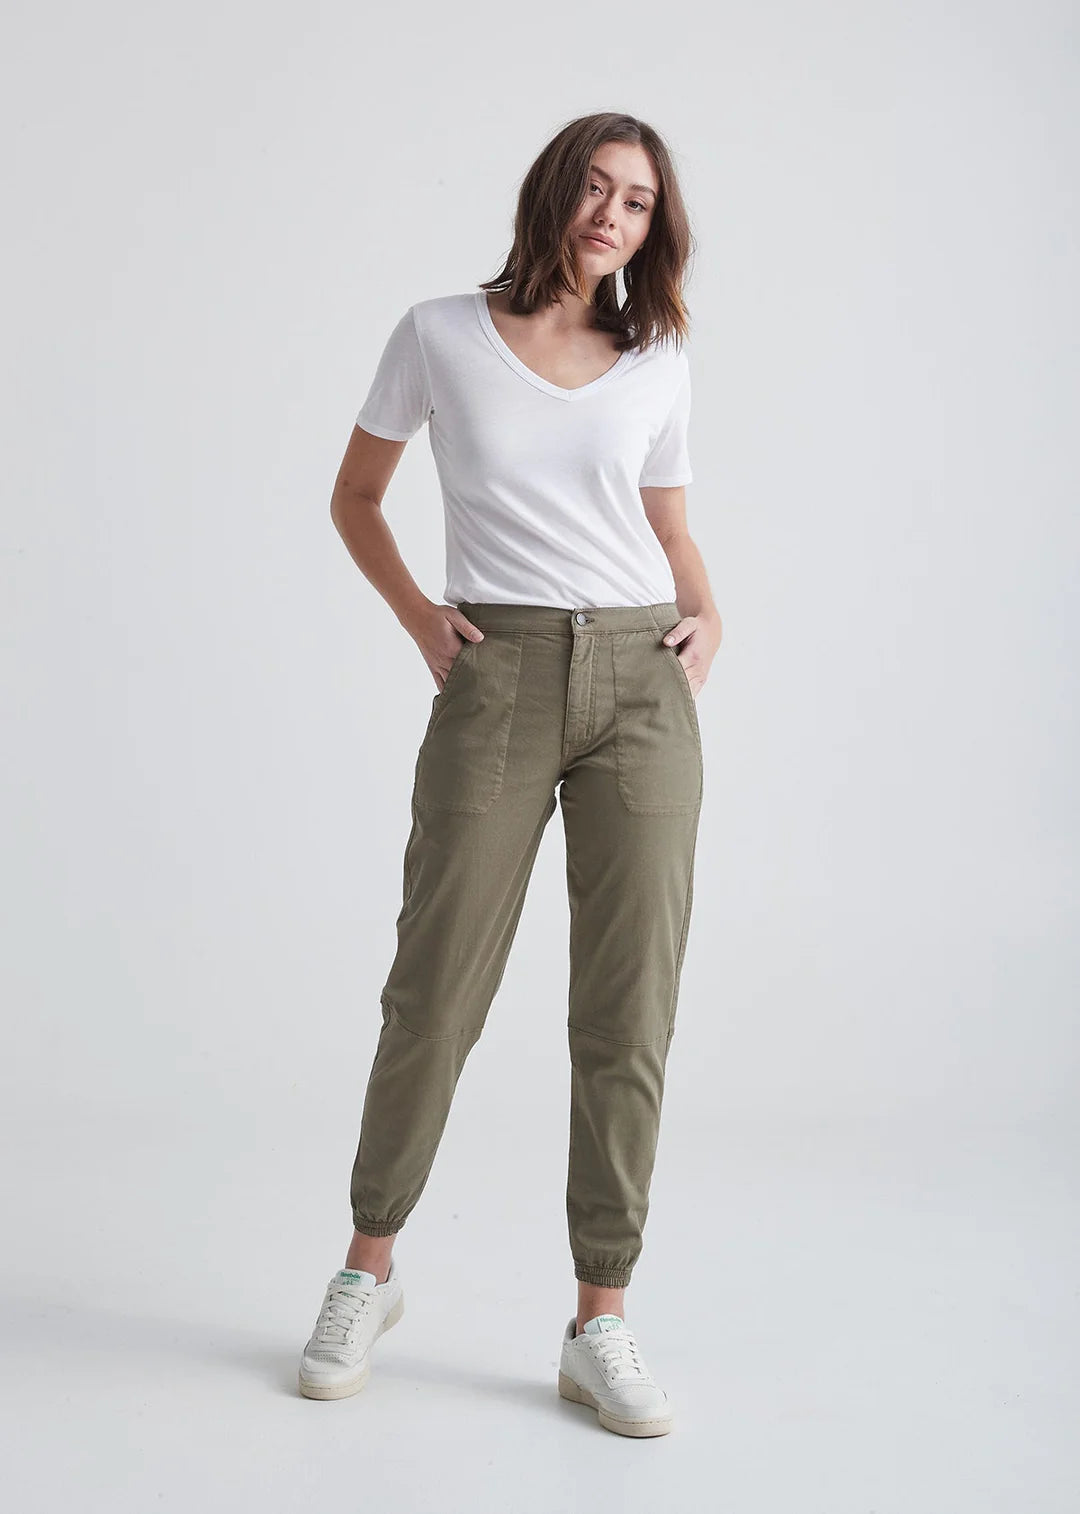 Live Free High Rise Jogger - Fatigues